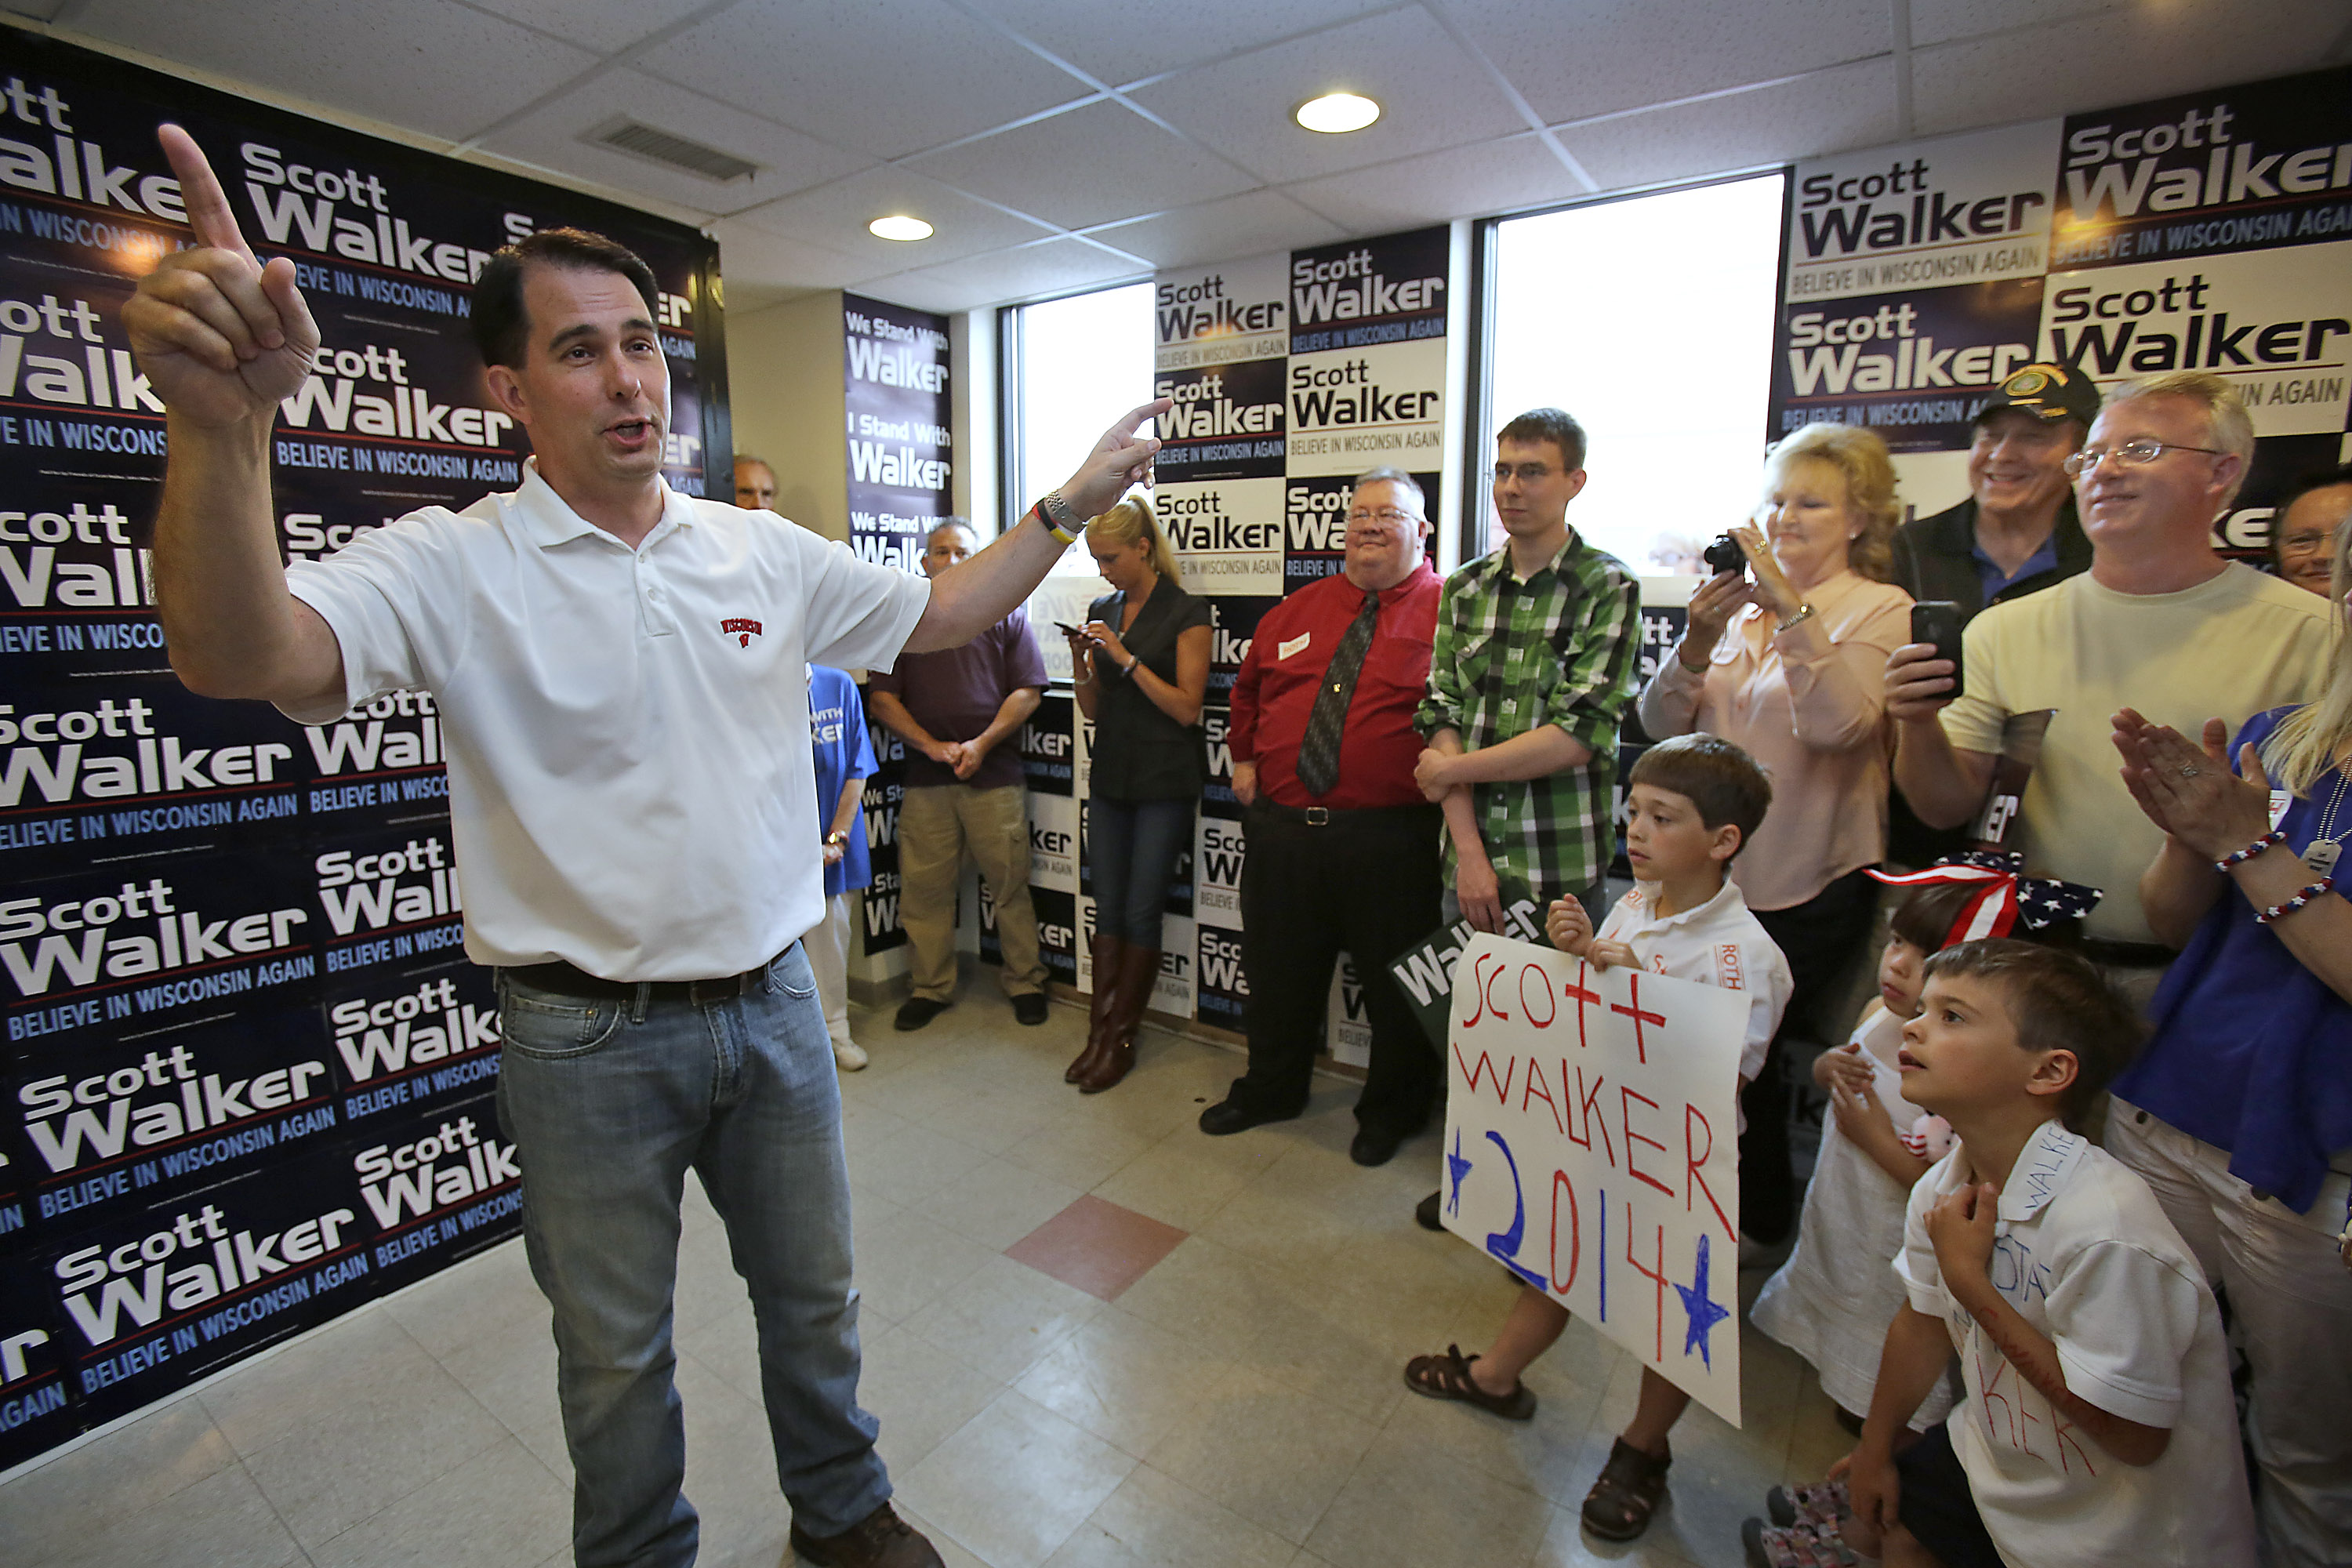 Wisconsin Governor Scott Walker makes a stop at the Republican Party of Wisconsin Appleton Headquarters Saturday, June 21, 2014 in Appleton, Wis. (Sharon Cekada&mdash;AP)